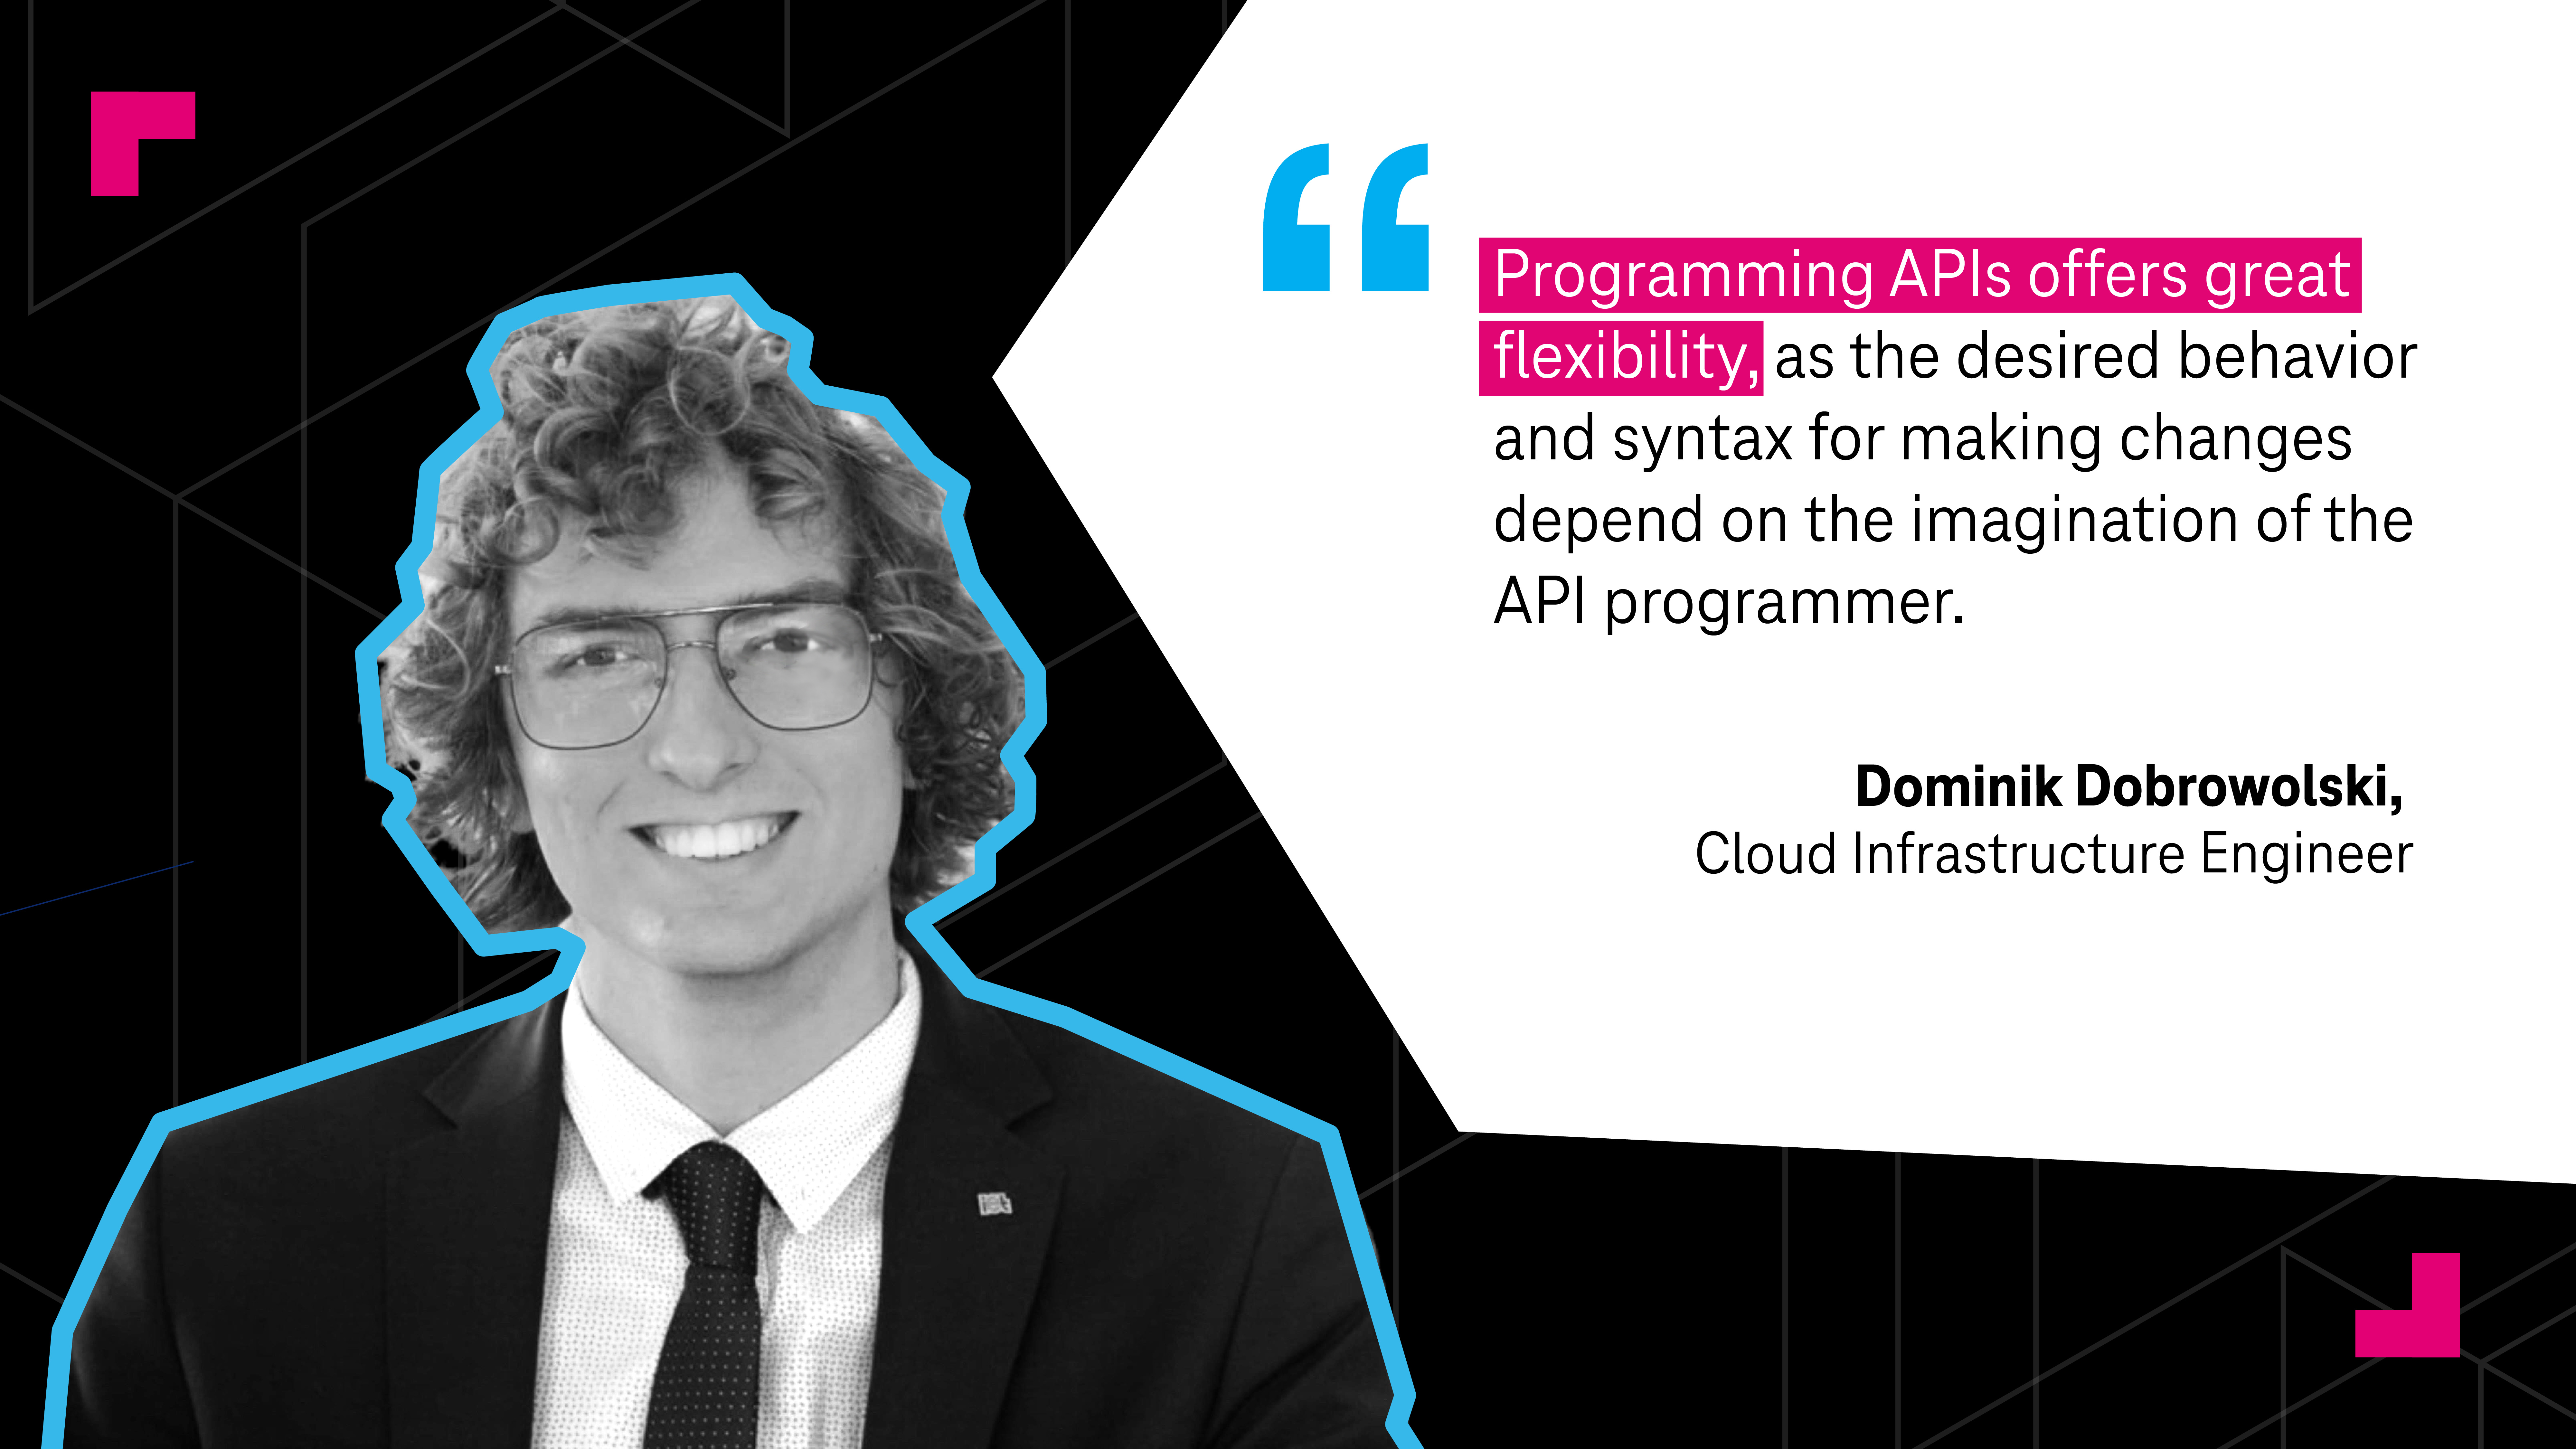 "Programming APIs offers great flexibility, as the desired behavior and syntax for making changes depend on the imagination of the API programmer." Dominik Dobrowolski, Cloud Infrastructure Engineer